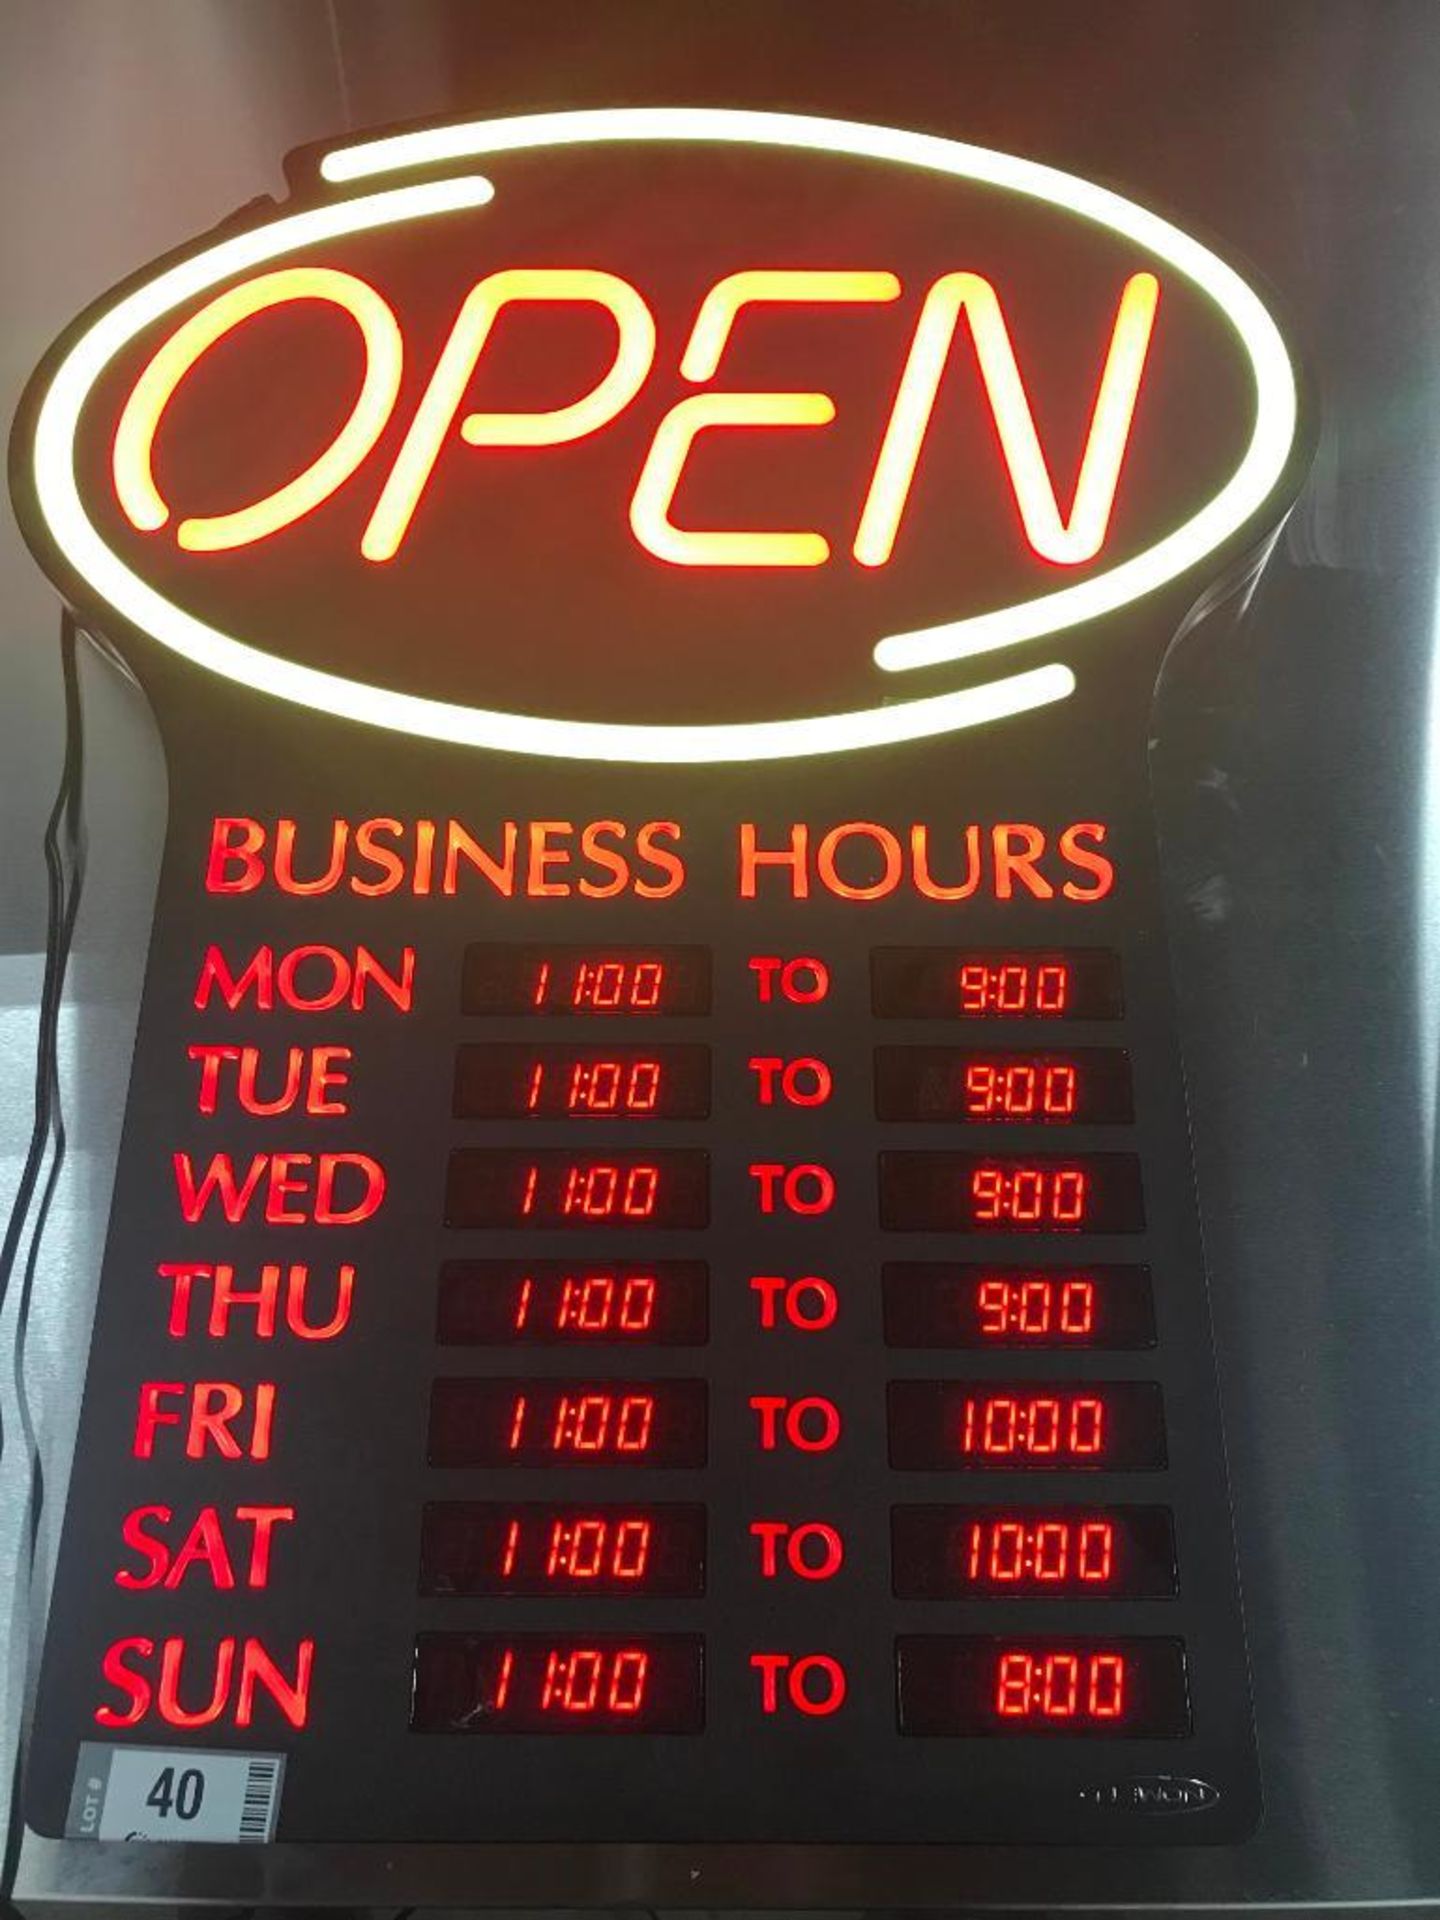 NEWON LED OPEN SIGN WITH PROGRAMMABLE BUSINESS HOURS AND FLASHING EFFECTS - Image 5 of 8